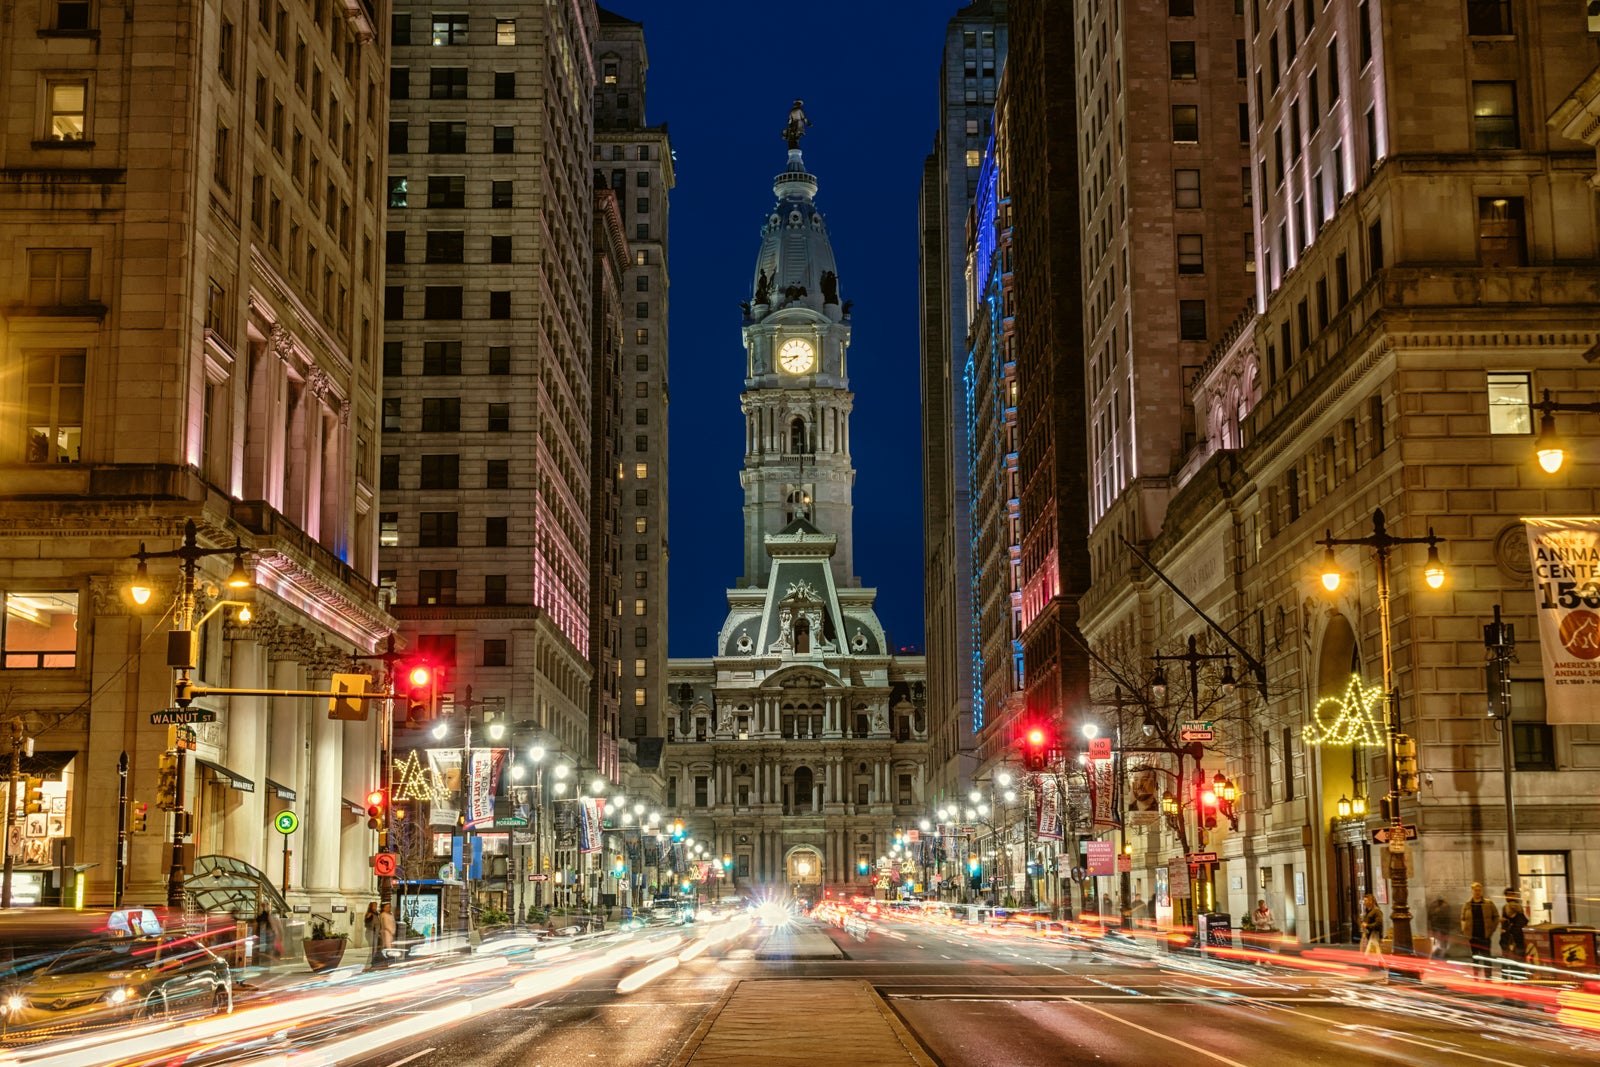 Travel Architecture and Landmark concept, Philadelphia City Hall building which is landmark historic at twilight time with car traffic light, United States of America or USA,